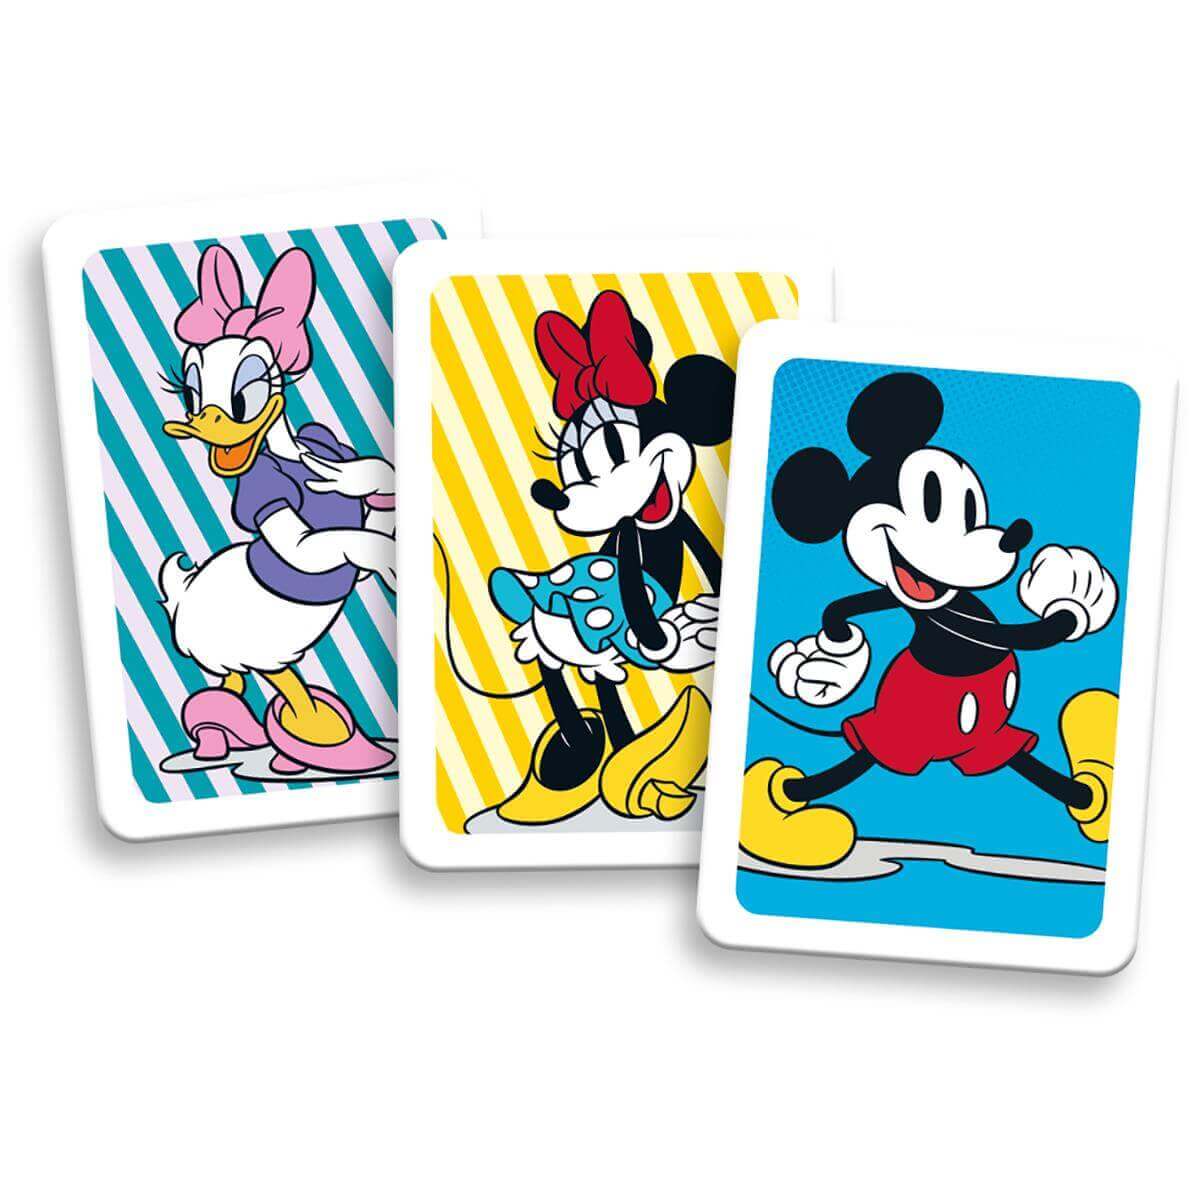 disney-mickey-and-friends-match-board-game